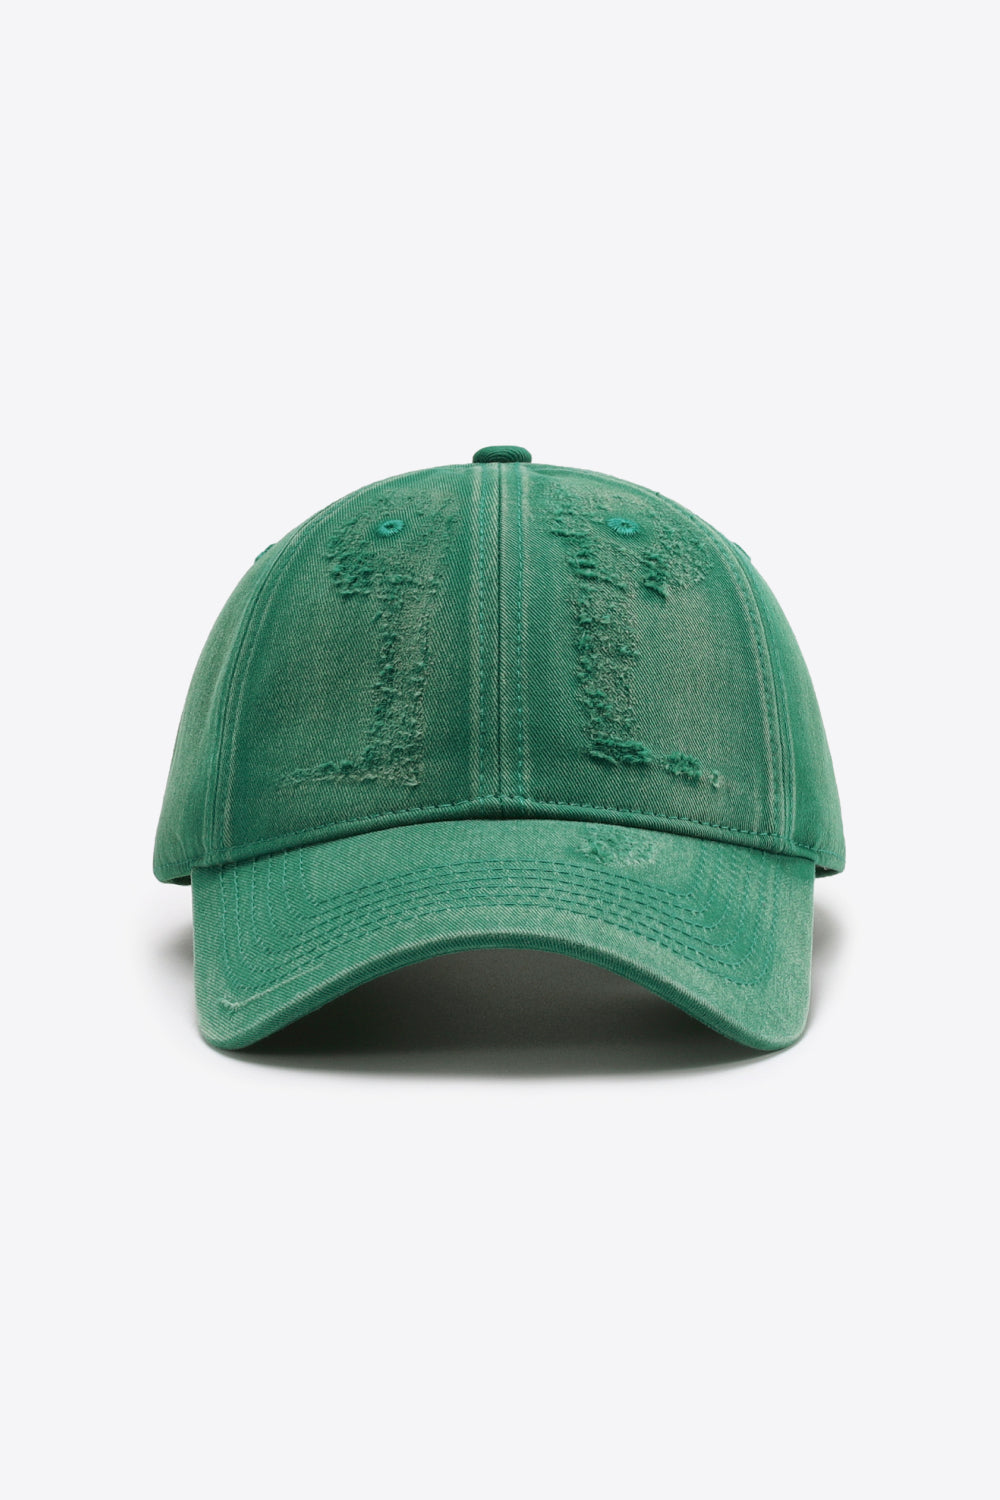 Distressed Adjustable Baseball Cap Green One Size